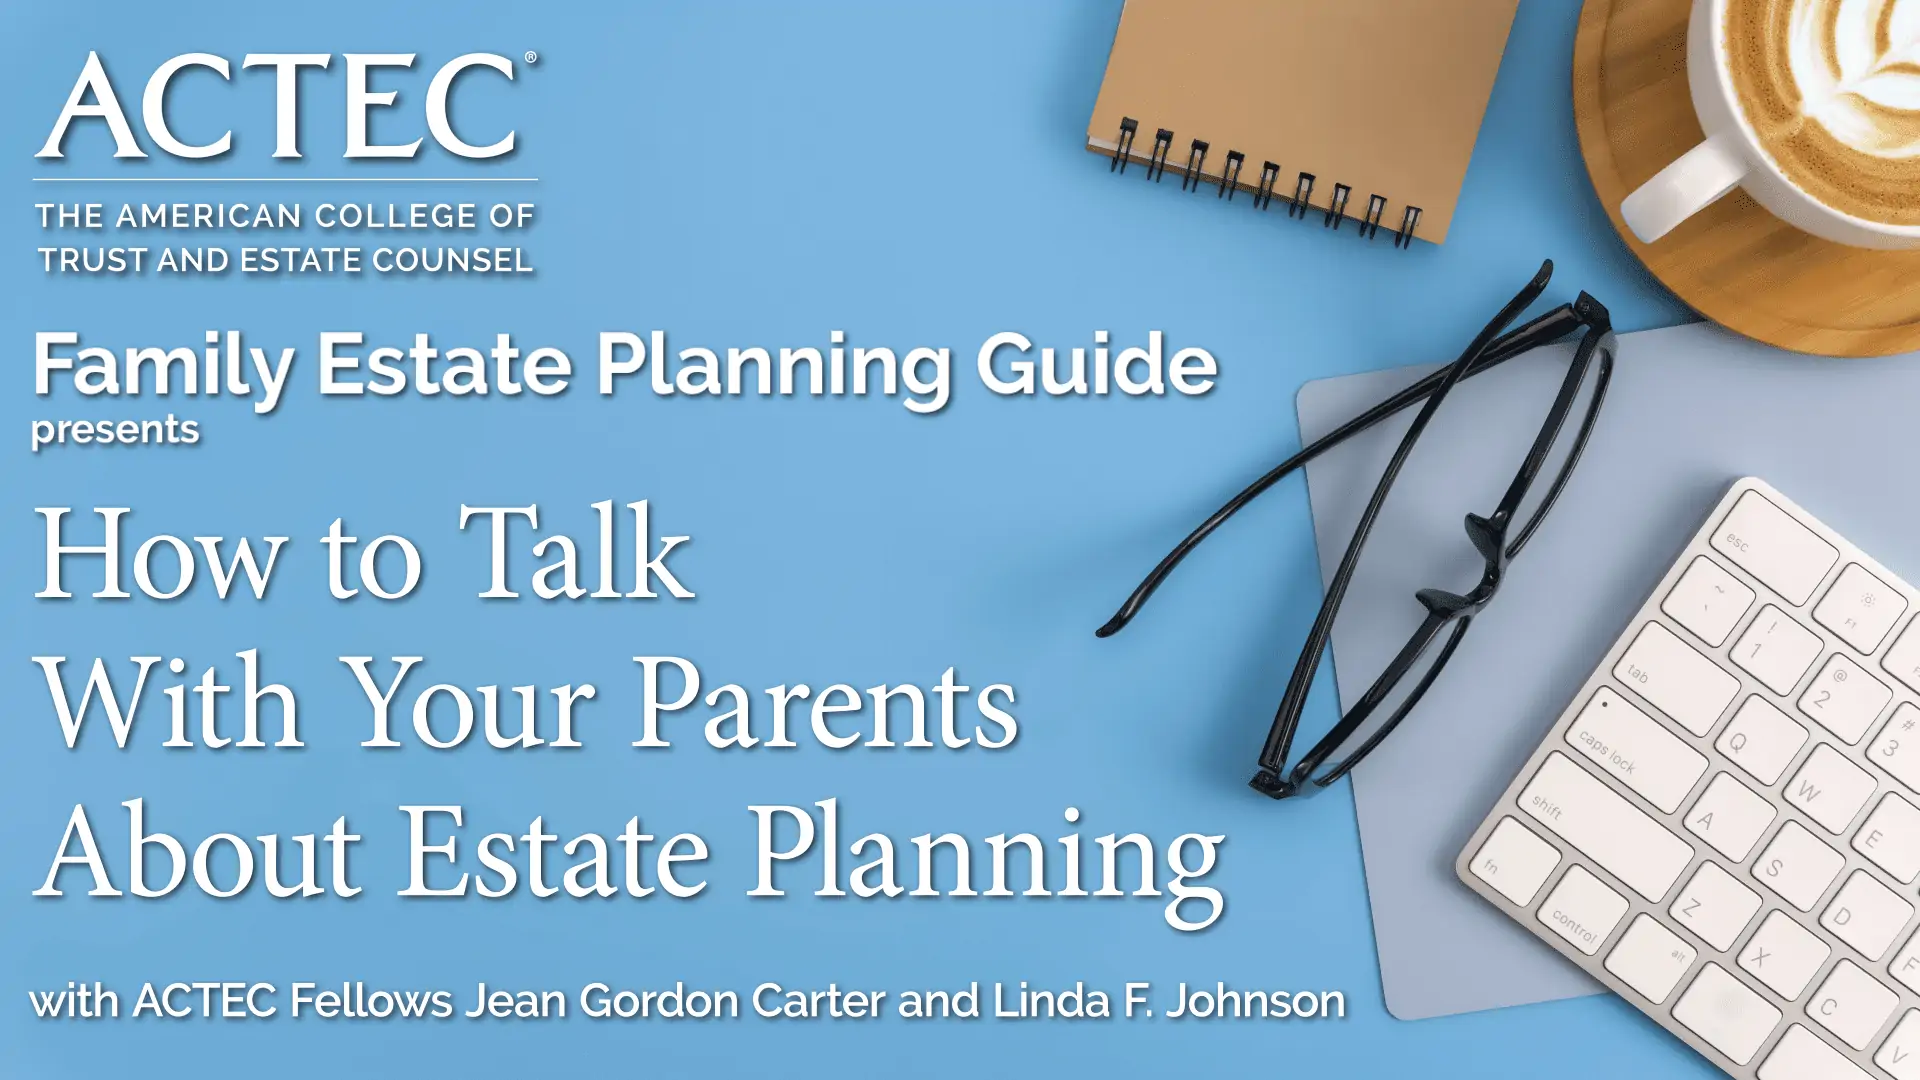 How to Talk With Your Parents About Estate Planning